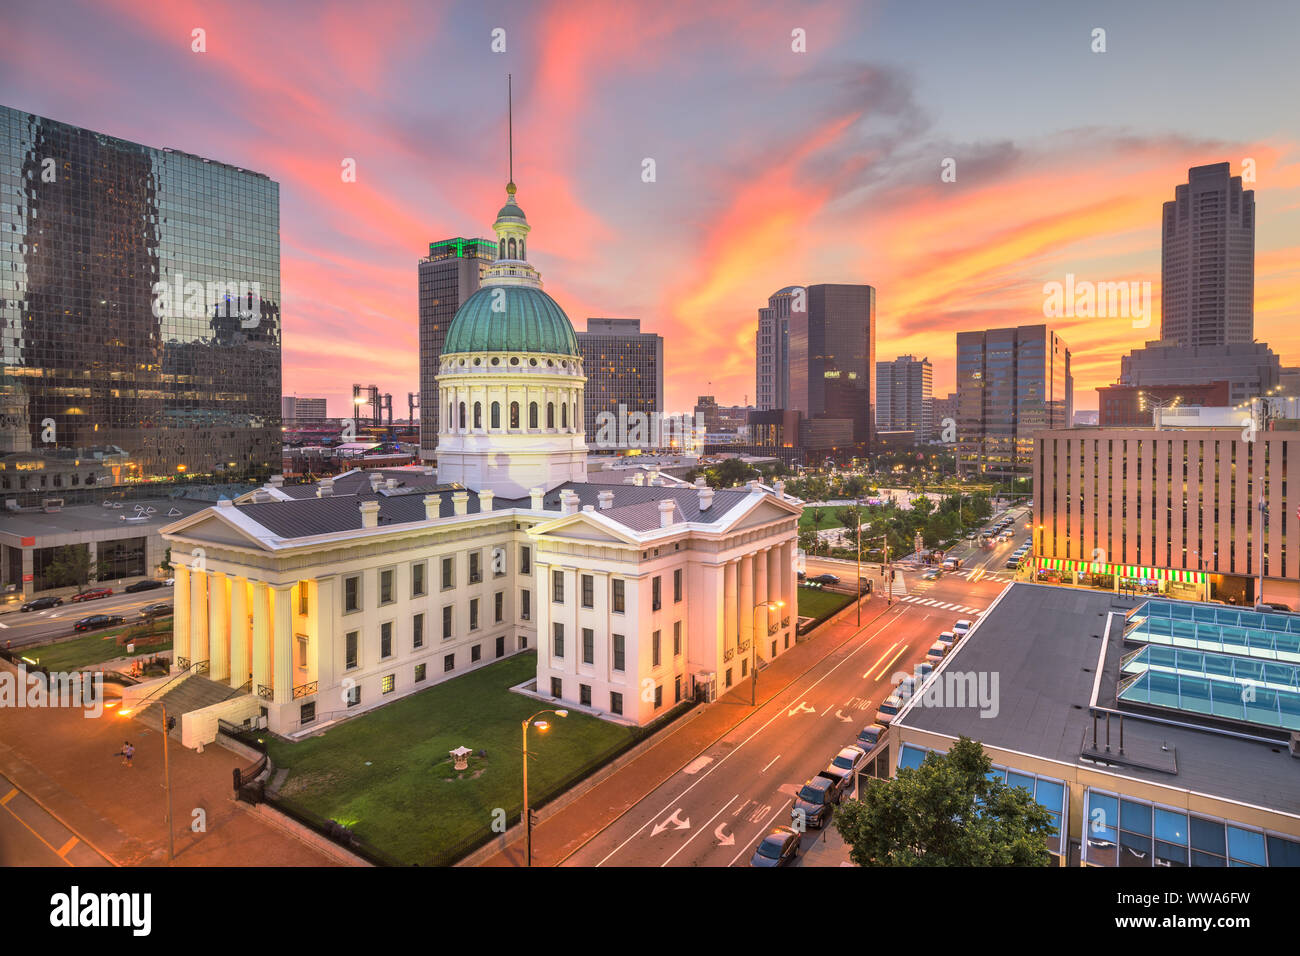 The old courthouse at dusk in downtown St. Louis, Missouri, USA. Stock Photo